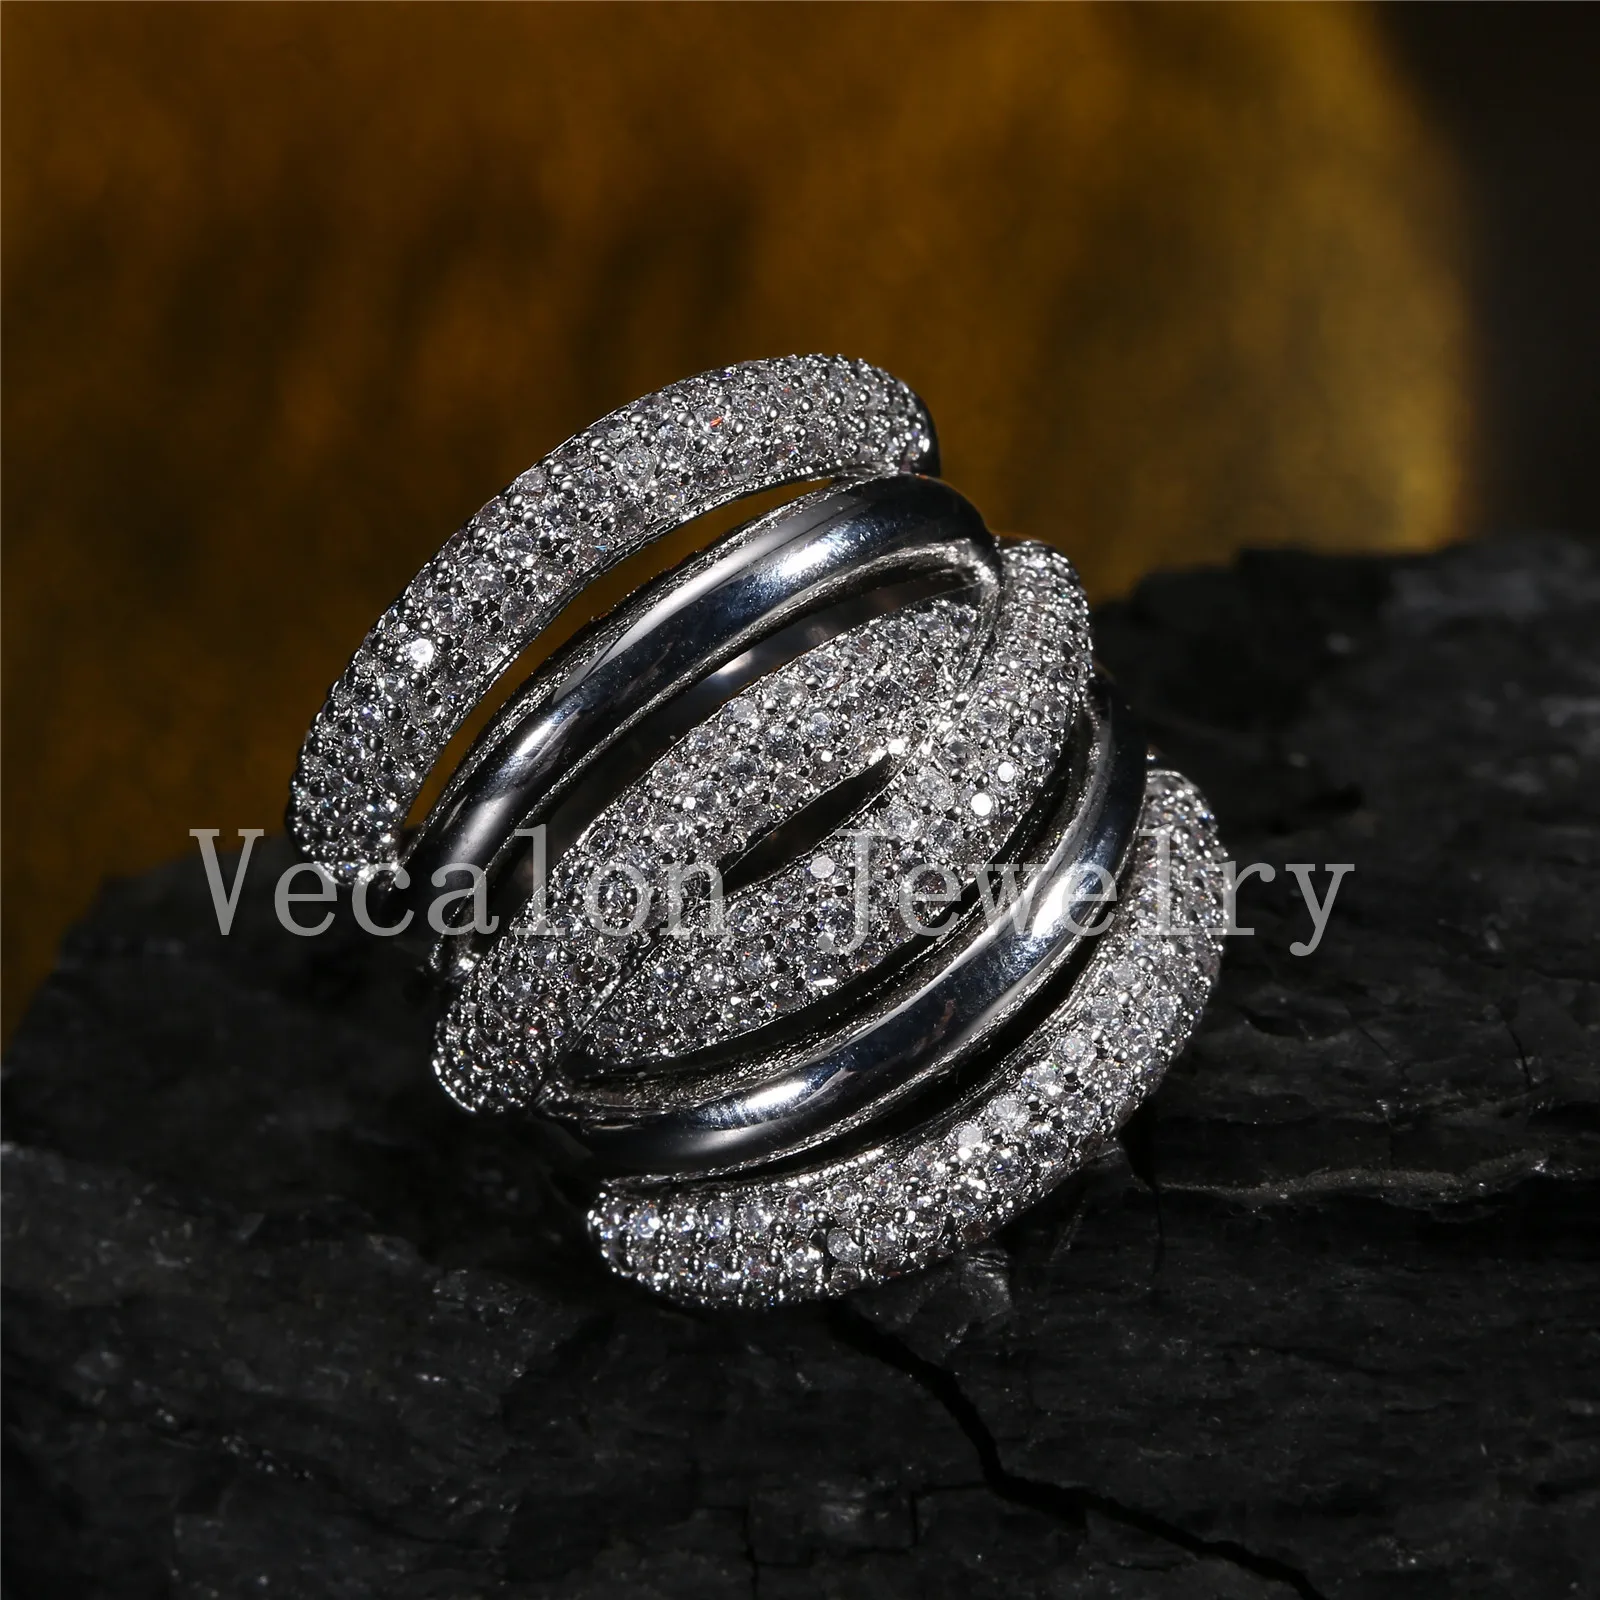 Vecalon pave set Topaz Simulated diamond Cz Cross Engagement Wedding ring for Women 14KT White Gold Filled Female Band ring